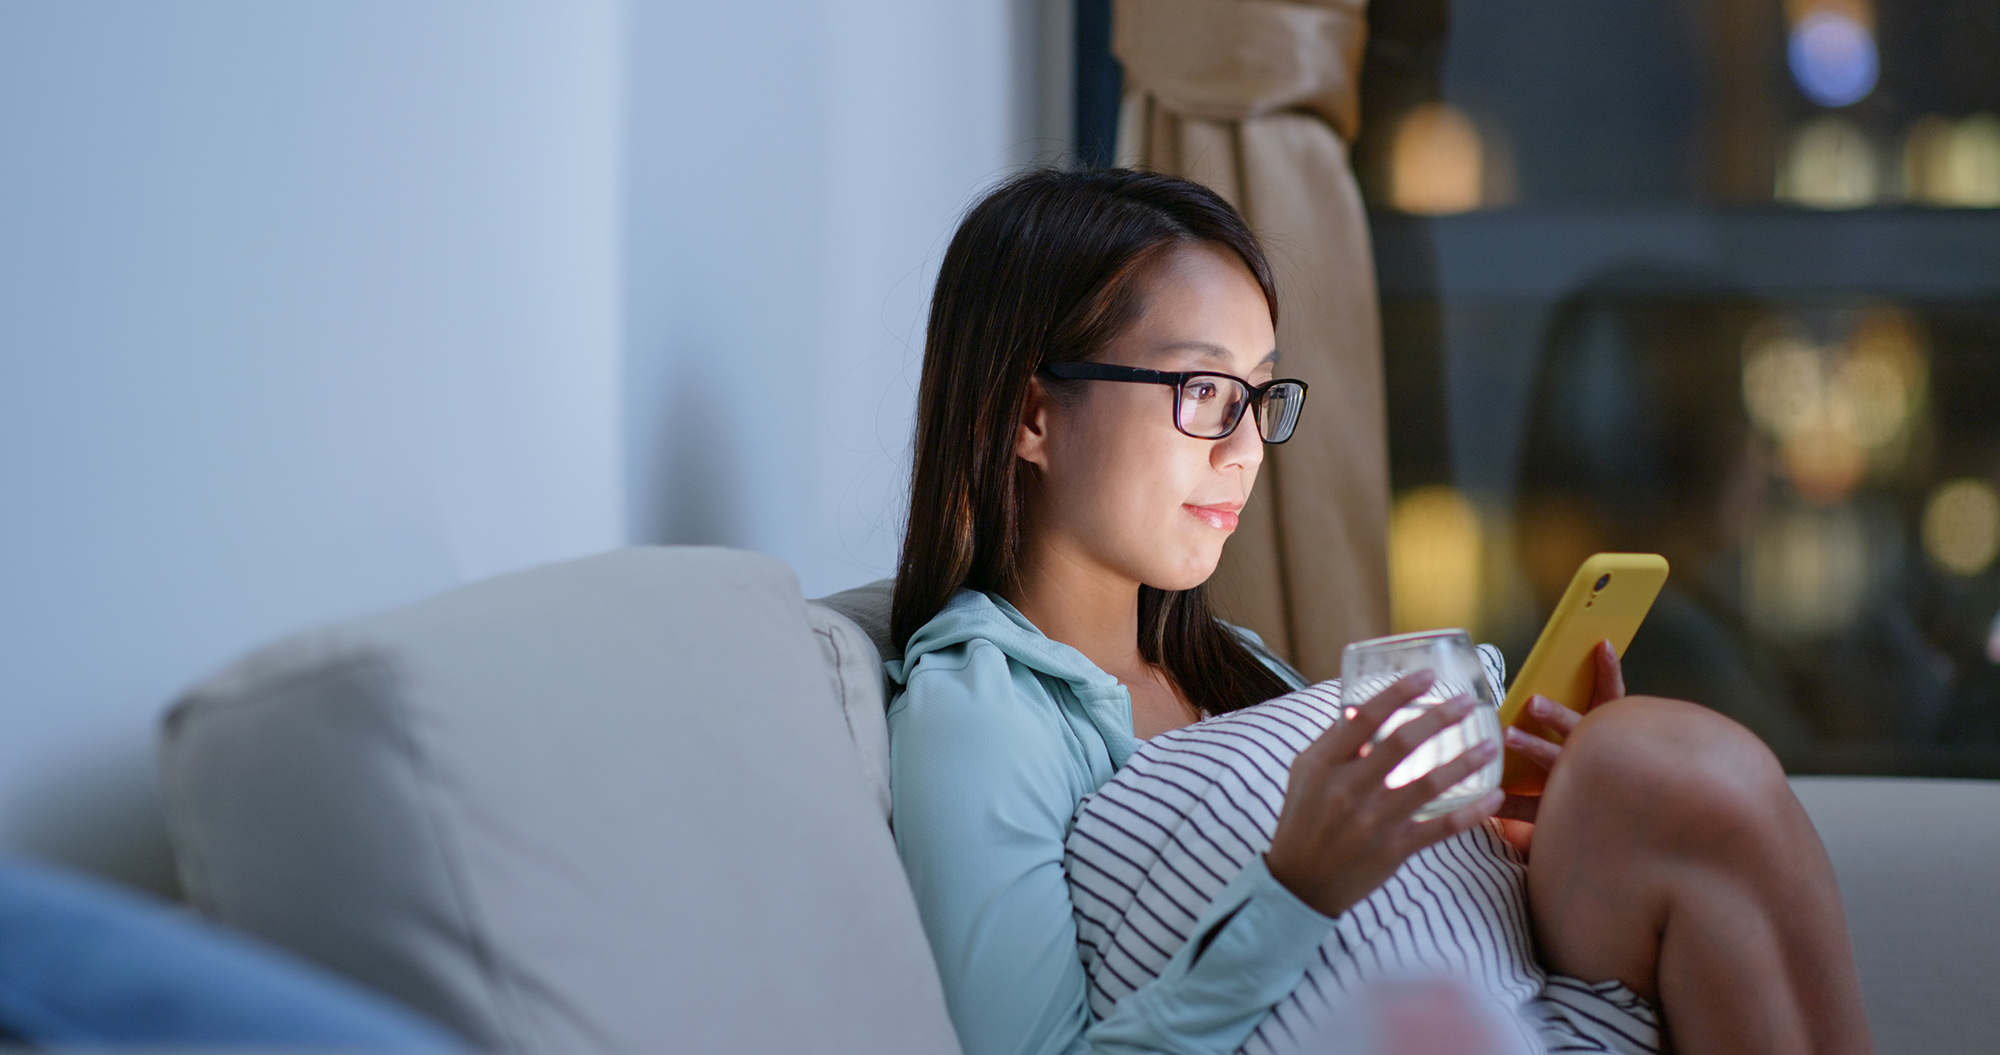 An Asian woman with dark hair and glasses sitting on the couch at night holding a glass of water and looking at her phone.